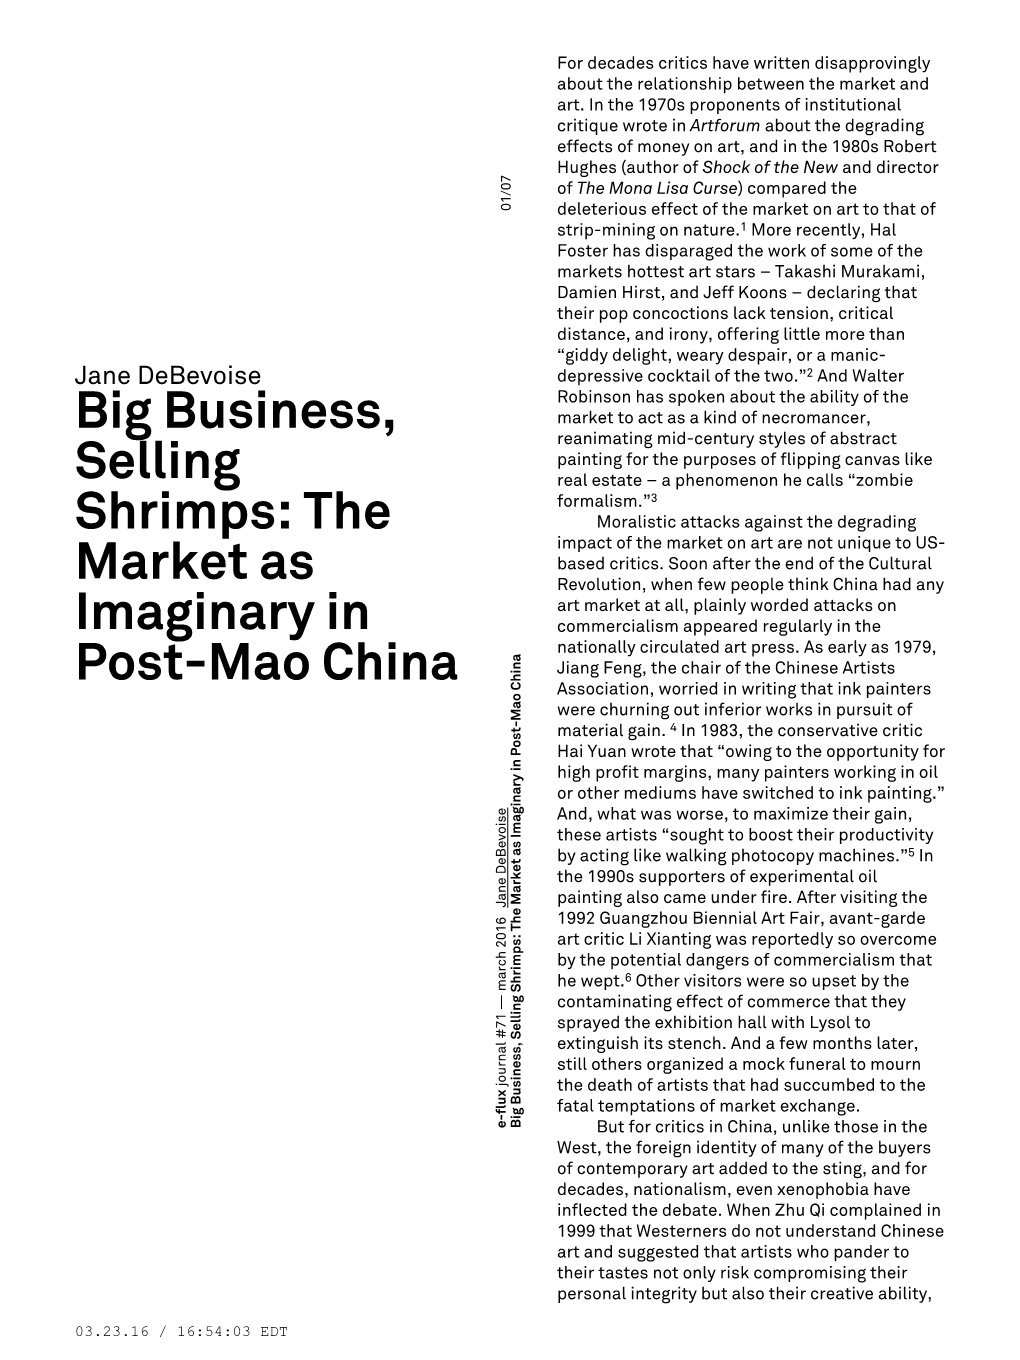 Big Business, Selling Shrimps: the Market As Imaginary in Post-Mao